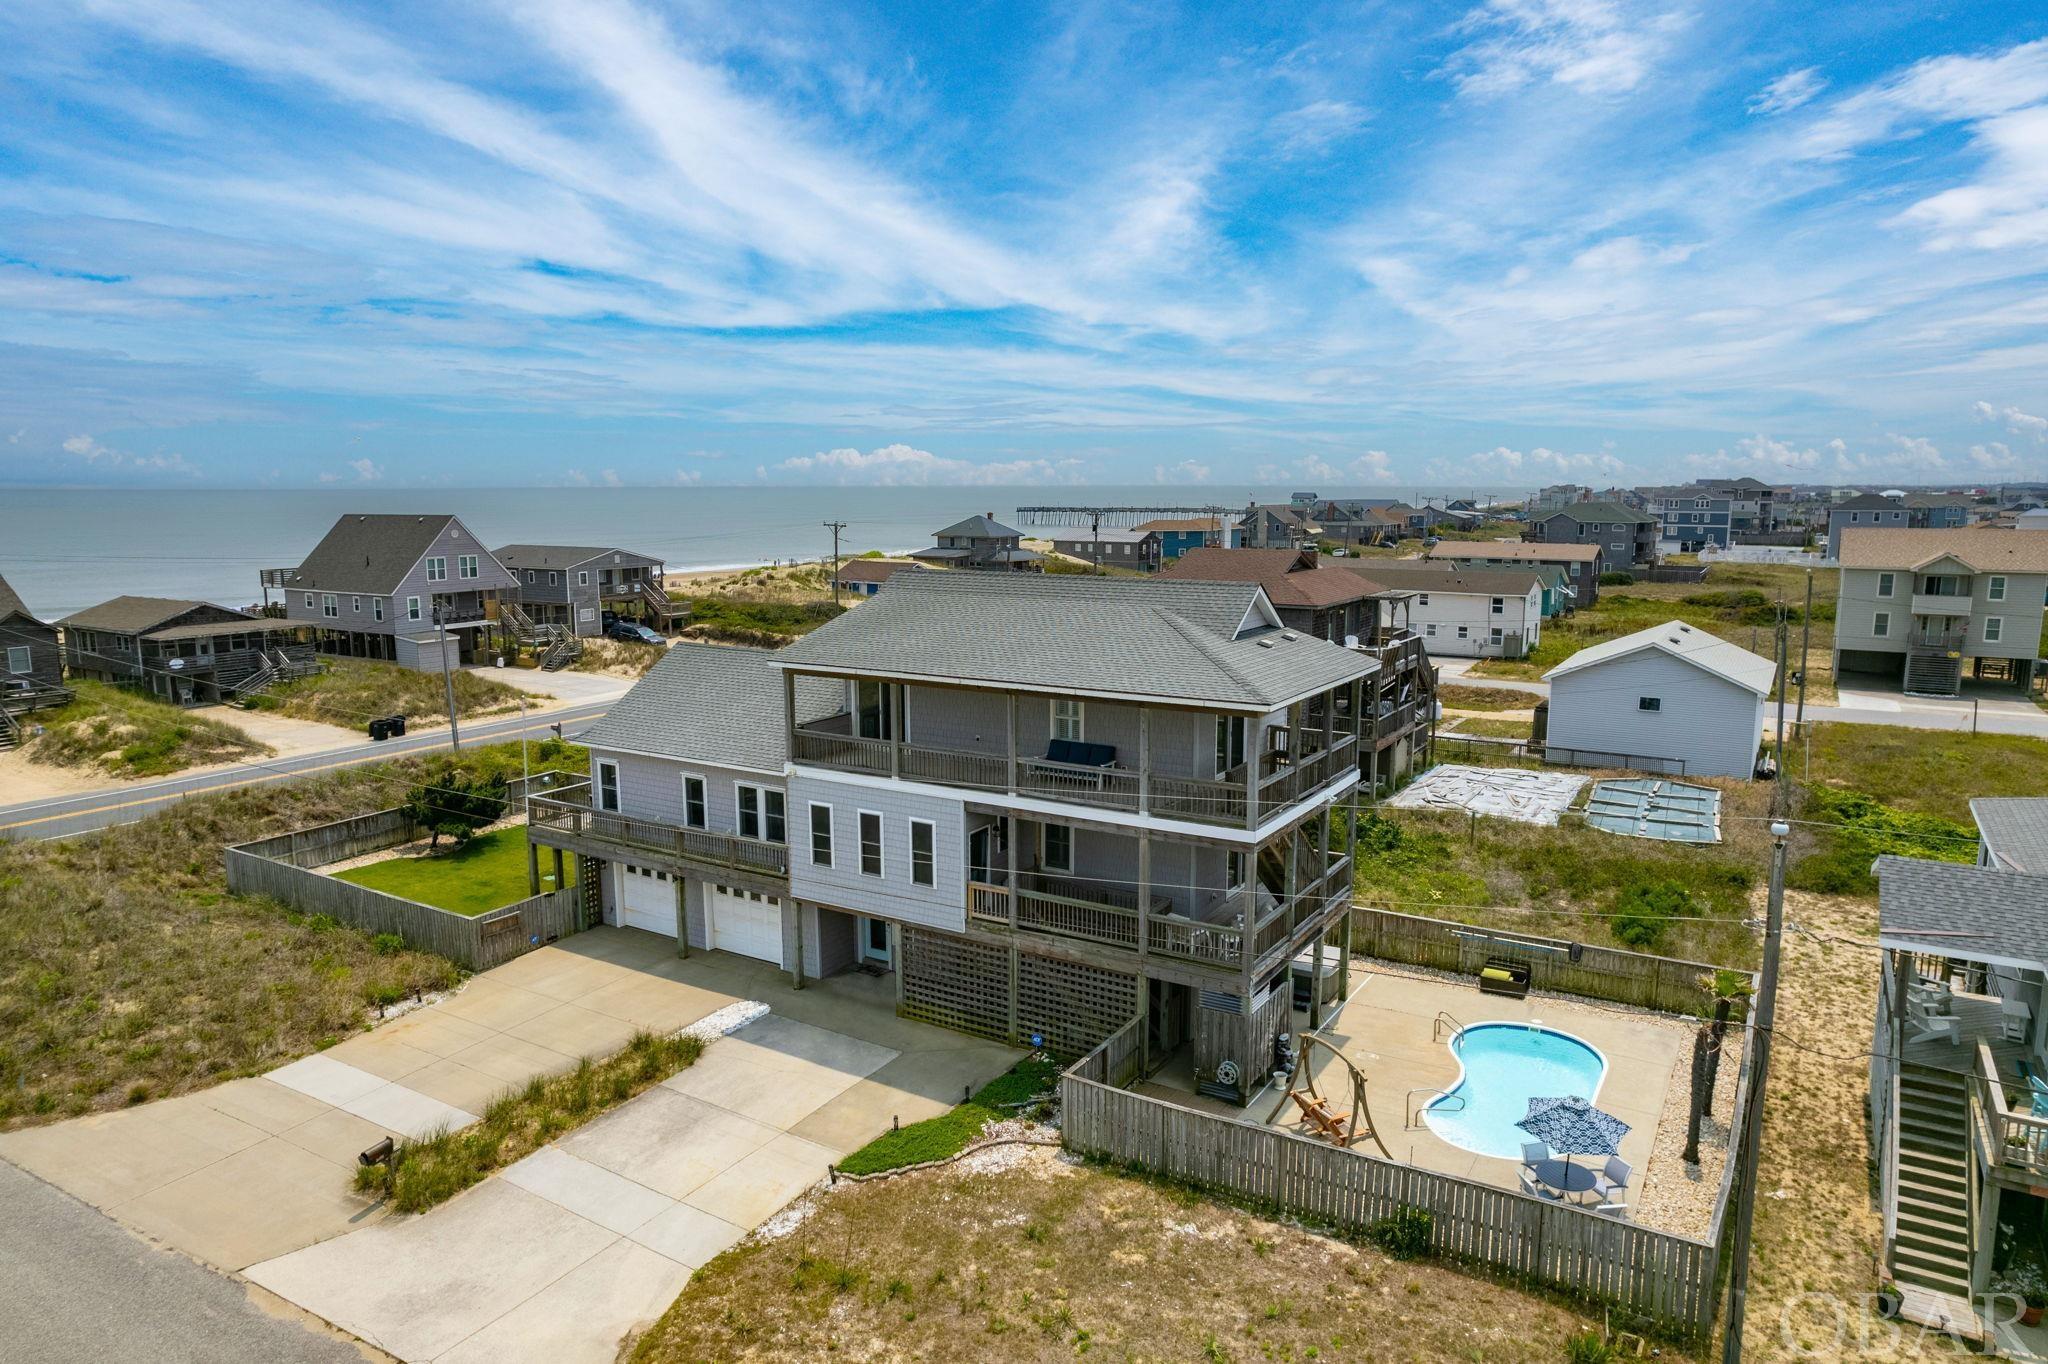 RARE opportunity semi-ocean front in the heart of Kill Devil Hills! From the moment you step on to the property, you will be captivated by the expansive ocean views, thoughtful design, and unique qualities. Situated on a corner lot, this home features an oversized landscaped and irrigated yard, a separate pool area complete with a brand-new hot tub. A new pool heater was installed in 2022, allowing you a longer swimming season. Two new HVAC units were also installed in 2022. The home is meticulously maintained and has something for everyone to enjoy. This would be a wonderful year around, second home, or investment opportunity. There is no shortage of storage space with the 2-car garage having plenty of room for all your beach toys. Upon entering you are greeted in a tiled entryway giving way to the ground level bonus room. This room is set up with 2 twin over double bunk beds, has its own fireplace, wet bar, and private ensuite. Up the stairs you'll walk into a bright and airy open living concept with custom plantation shutters and breathtaking ocean views. Vaulted ceilings and expansive windows allow so much natural light to pour in. The open living area is perfect for entertaining or just relaxing on the couch by the fire. Hardwood floors span this entire level going into the large primary bedroom equipped with an ensuite with a custom tile shower. Just off the kitchen, there was a screened porch that was recently converted to an all-seasons room in early 2023. This is an excellent addition for another seating area or office space. The third level houses the other 2 bedrooms and a jack and jill bathroom. All new furniture was purchased in 2021 and it is beautifully decorated. This home has wrap-around porches to sit and enjoy the sunrise over the ocean or just take in that fresh ocean air. The yard is fully enclosed and fenced, perfect for your fur babies. Other features include an outdoor shower, foot rinse, and on-demand tankless water heater. The septic was pumped and risers installed in 2021. There is so much to love about this house, you can tell every detail was well thought out. Don't miss your chance to tour it today!